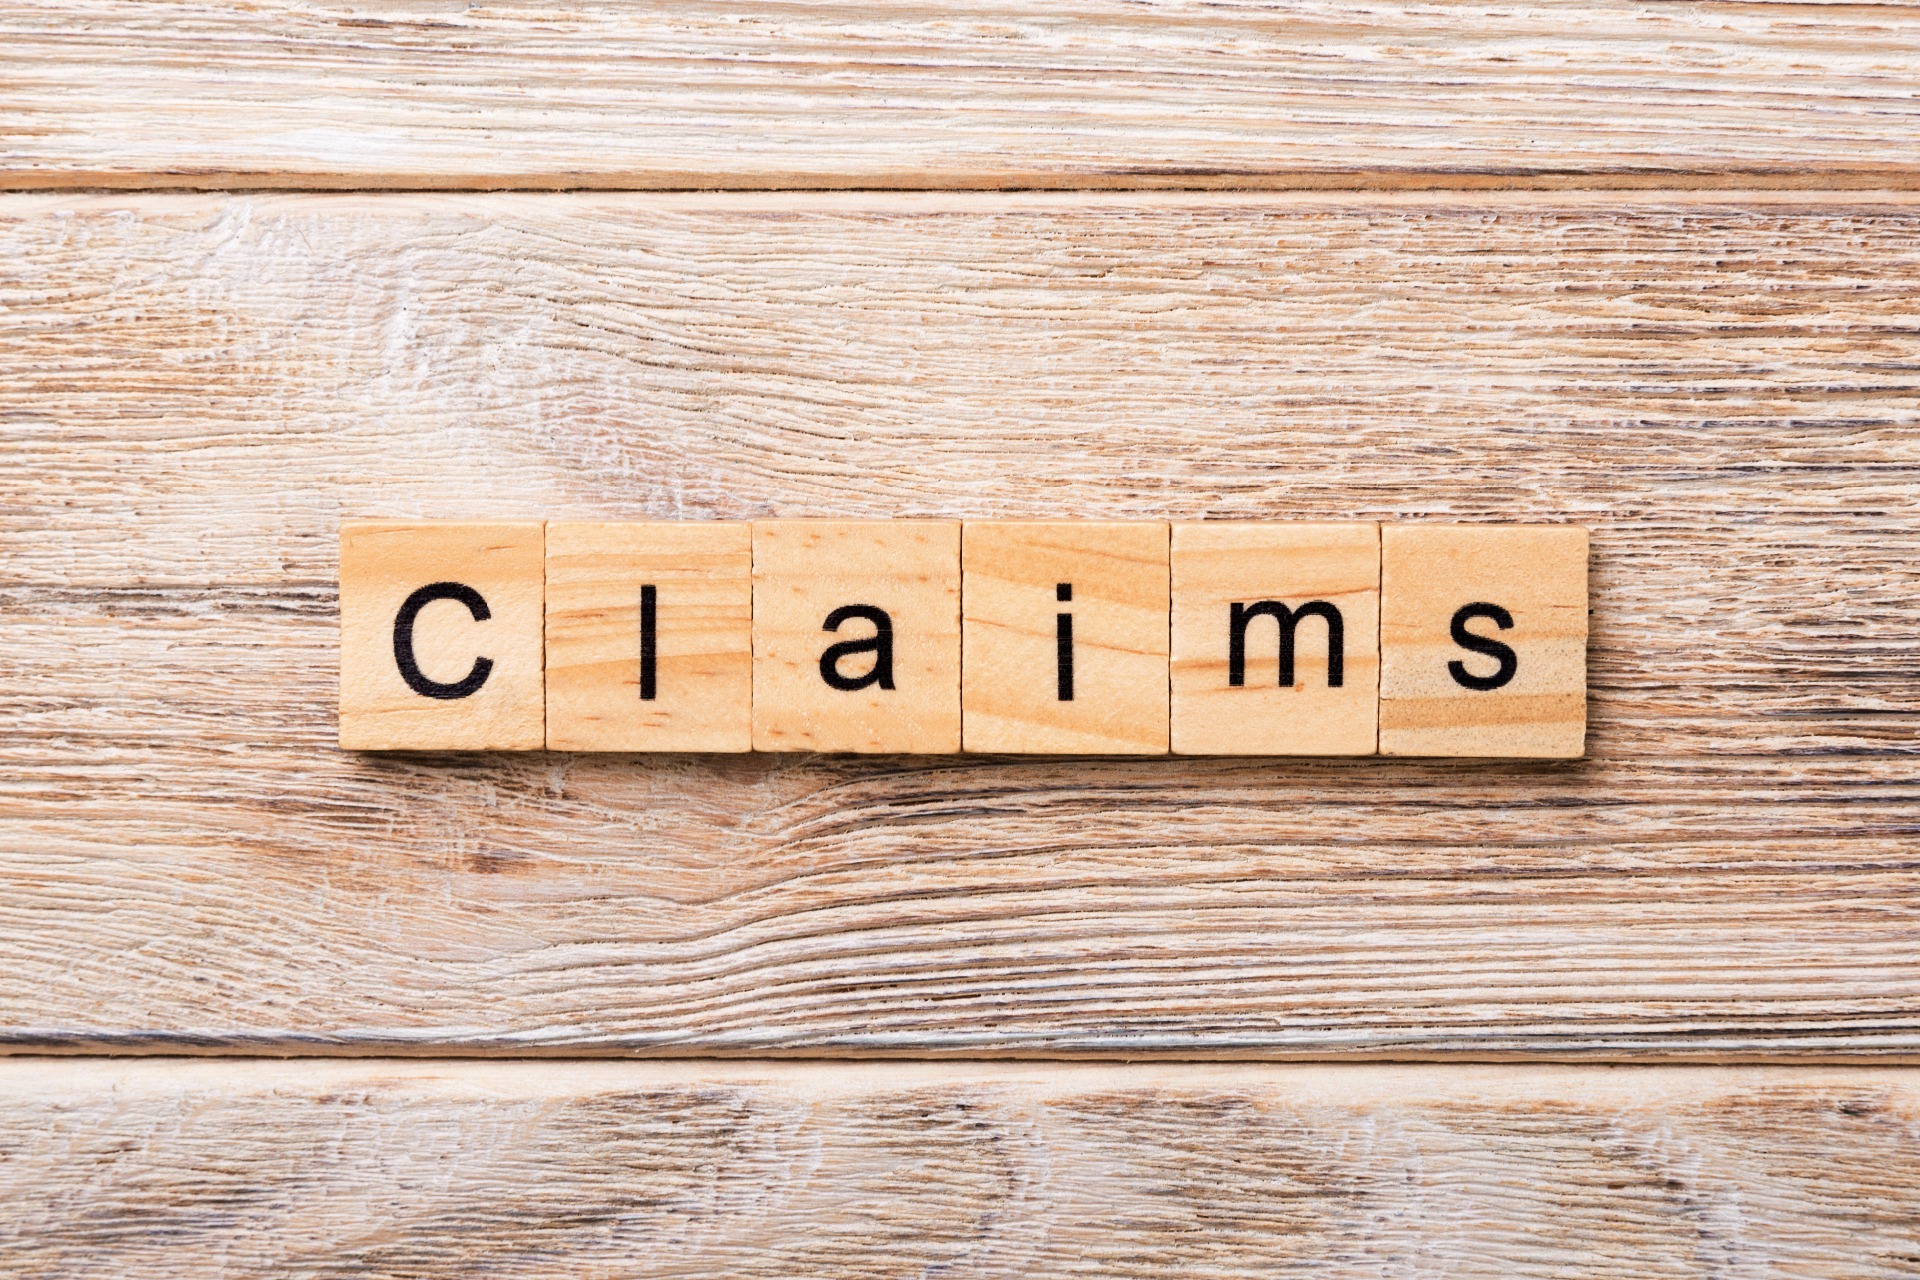 "Claims" in scrabble letters; our No Win No Fee Personal Injury Solicitors discuss making a Personal Injury claim and how we can help.